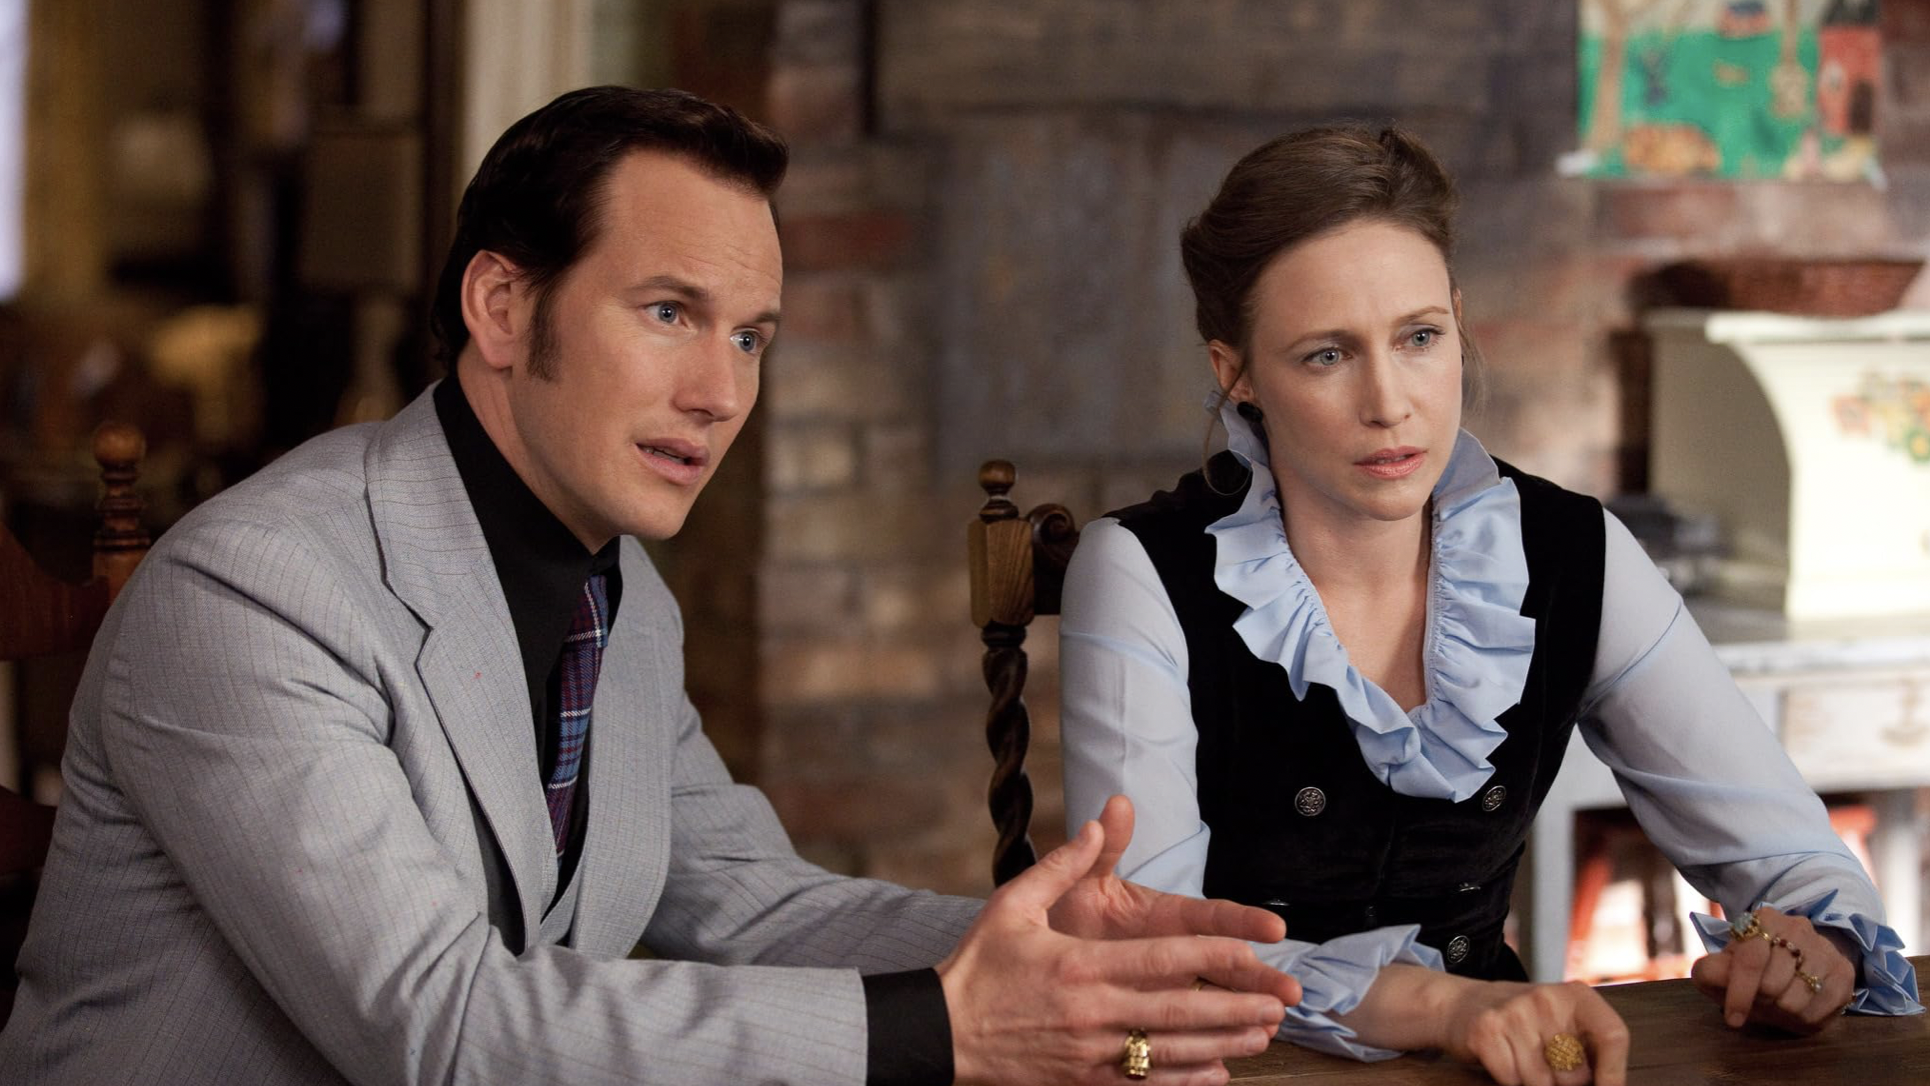 the conjuring movie trailer